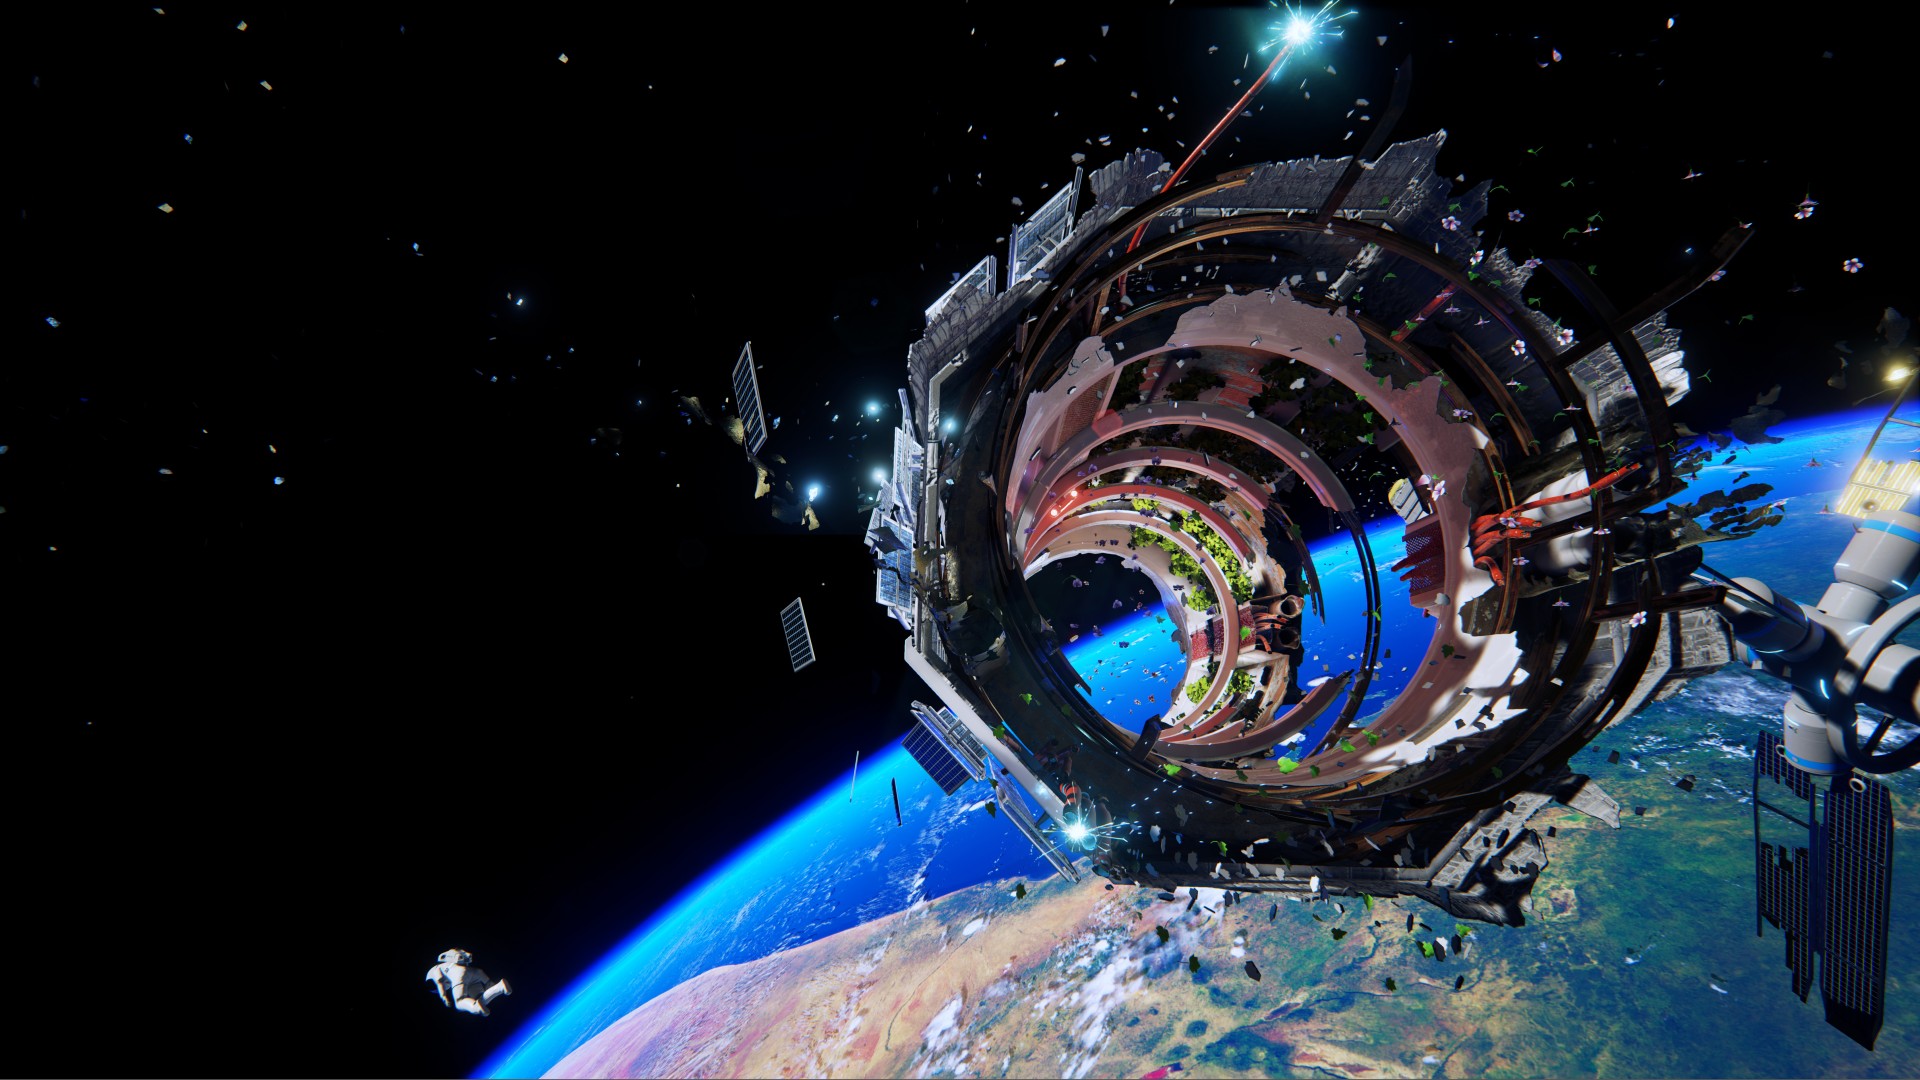 Adr1ft Wallpaper Games Simulation Game Space